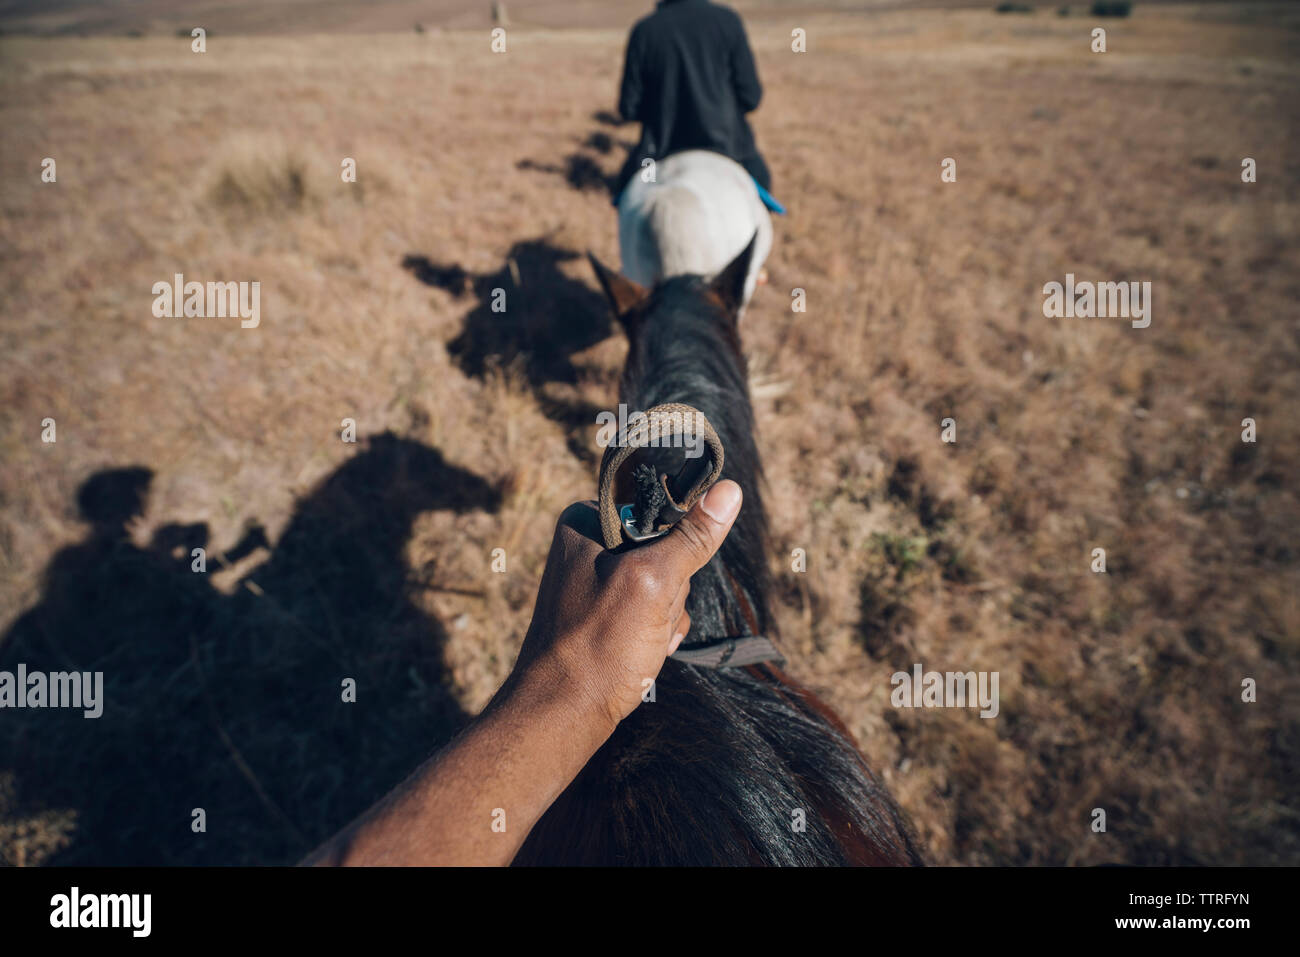 Cropped hand of man with woman riding horses on field Stock Photo